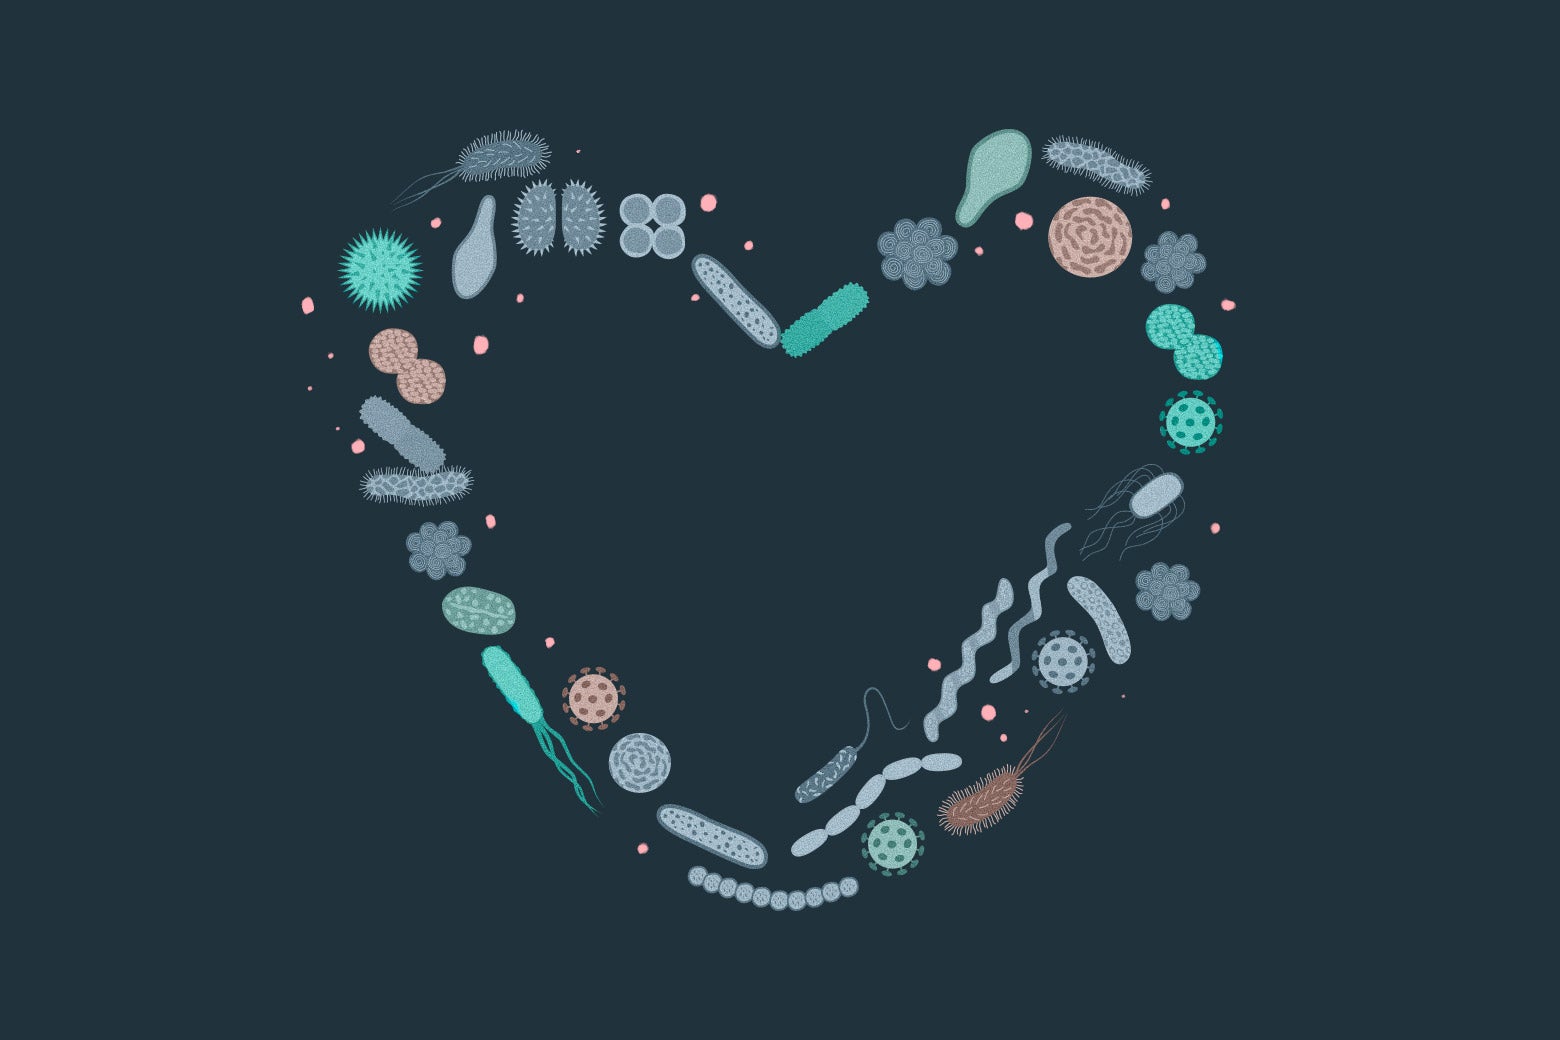 Microbes arranged in the shape of a heart.